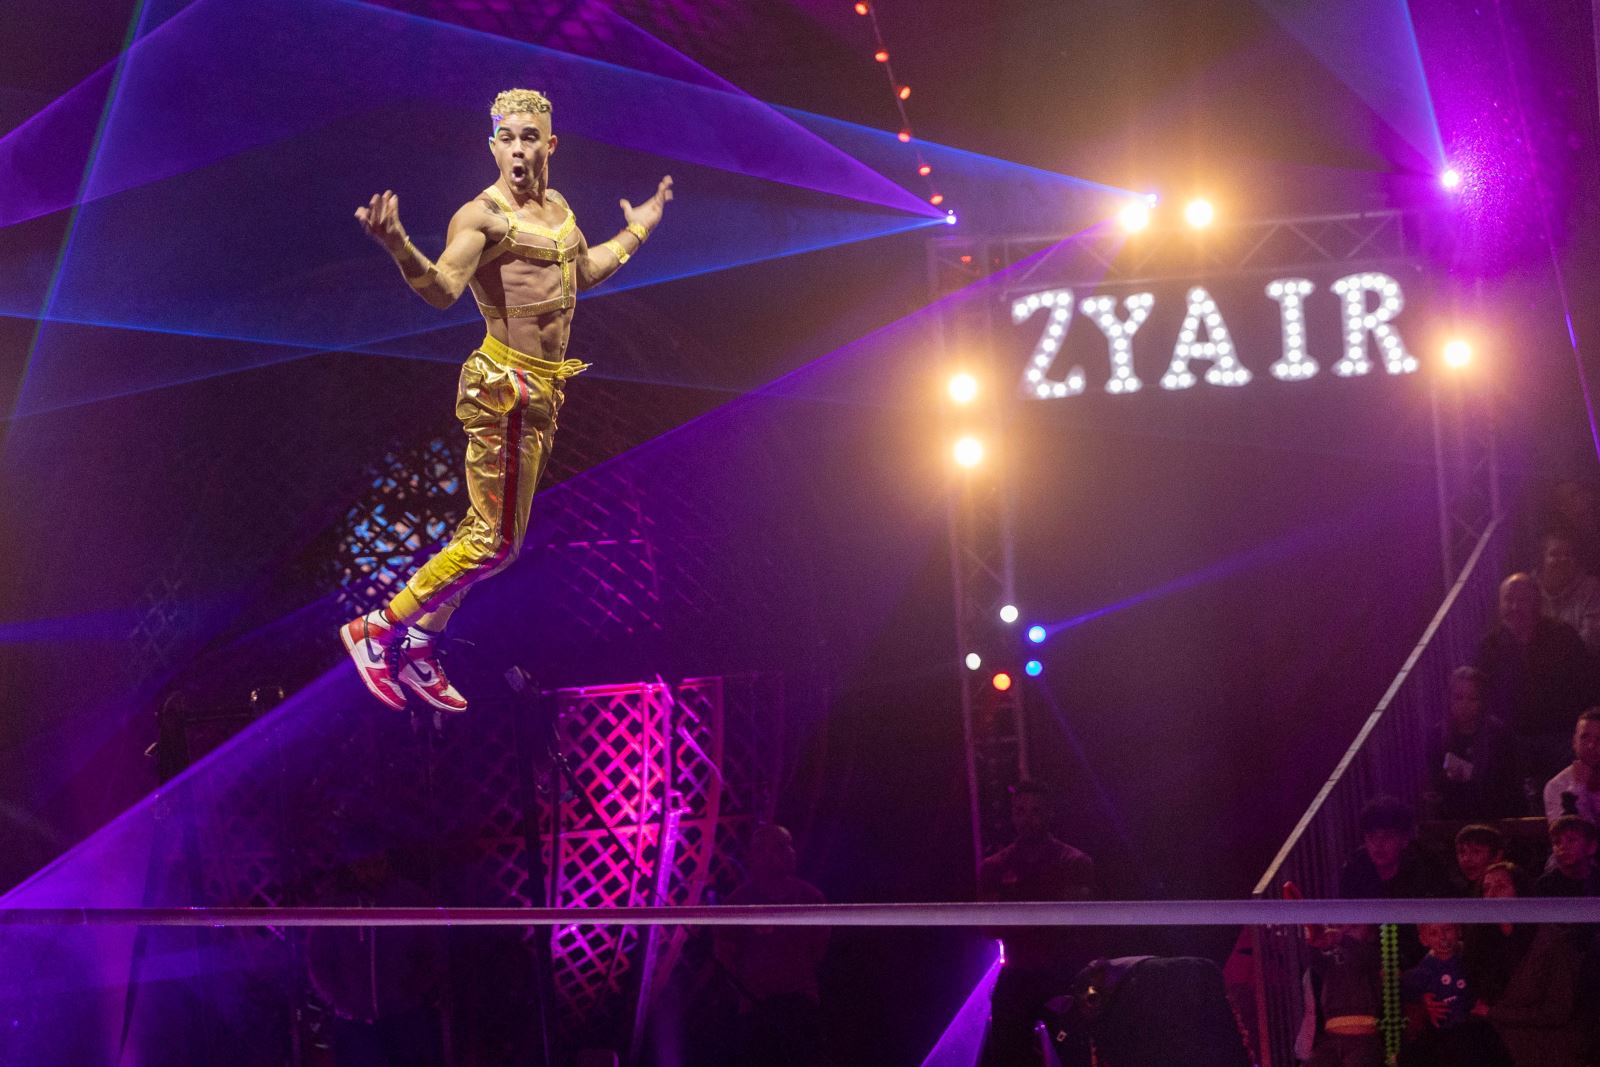 Circus performer jumps above the high wire